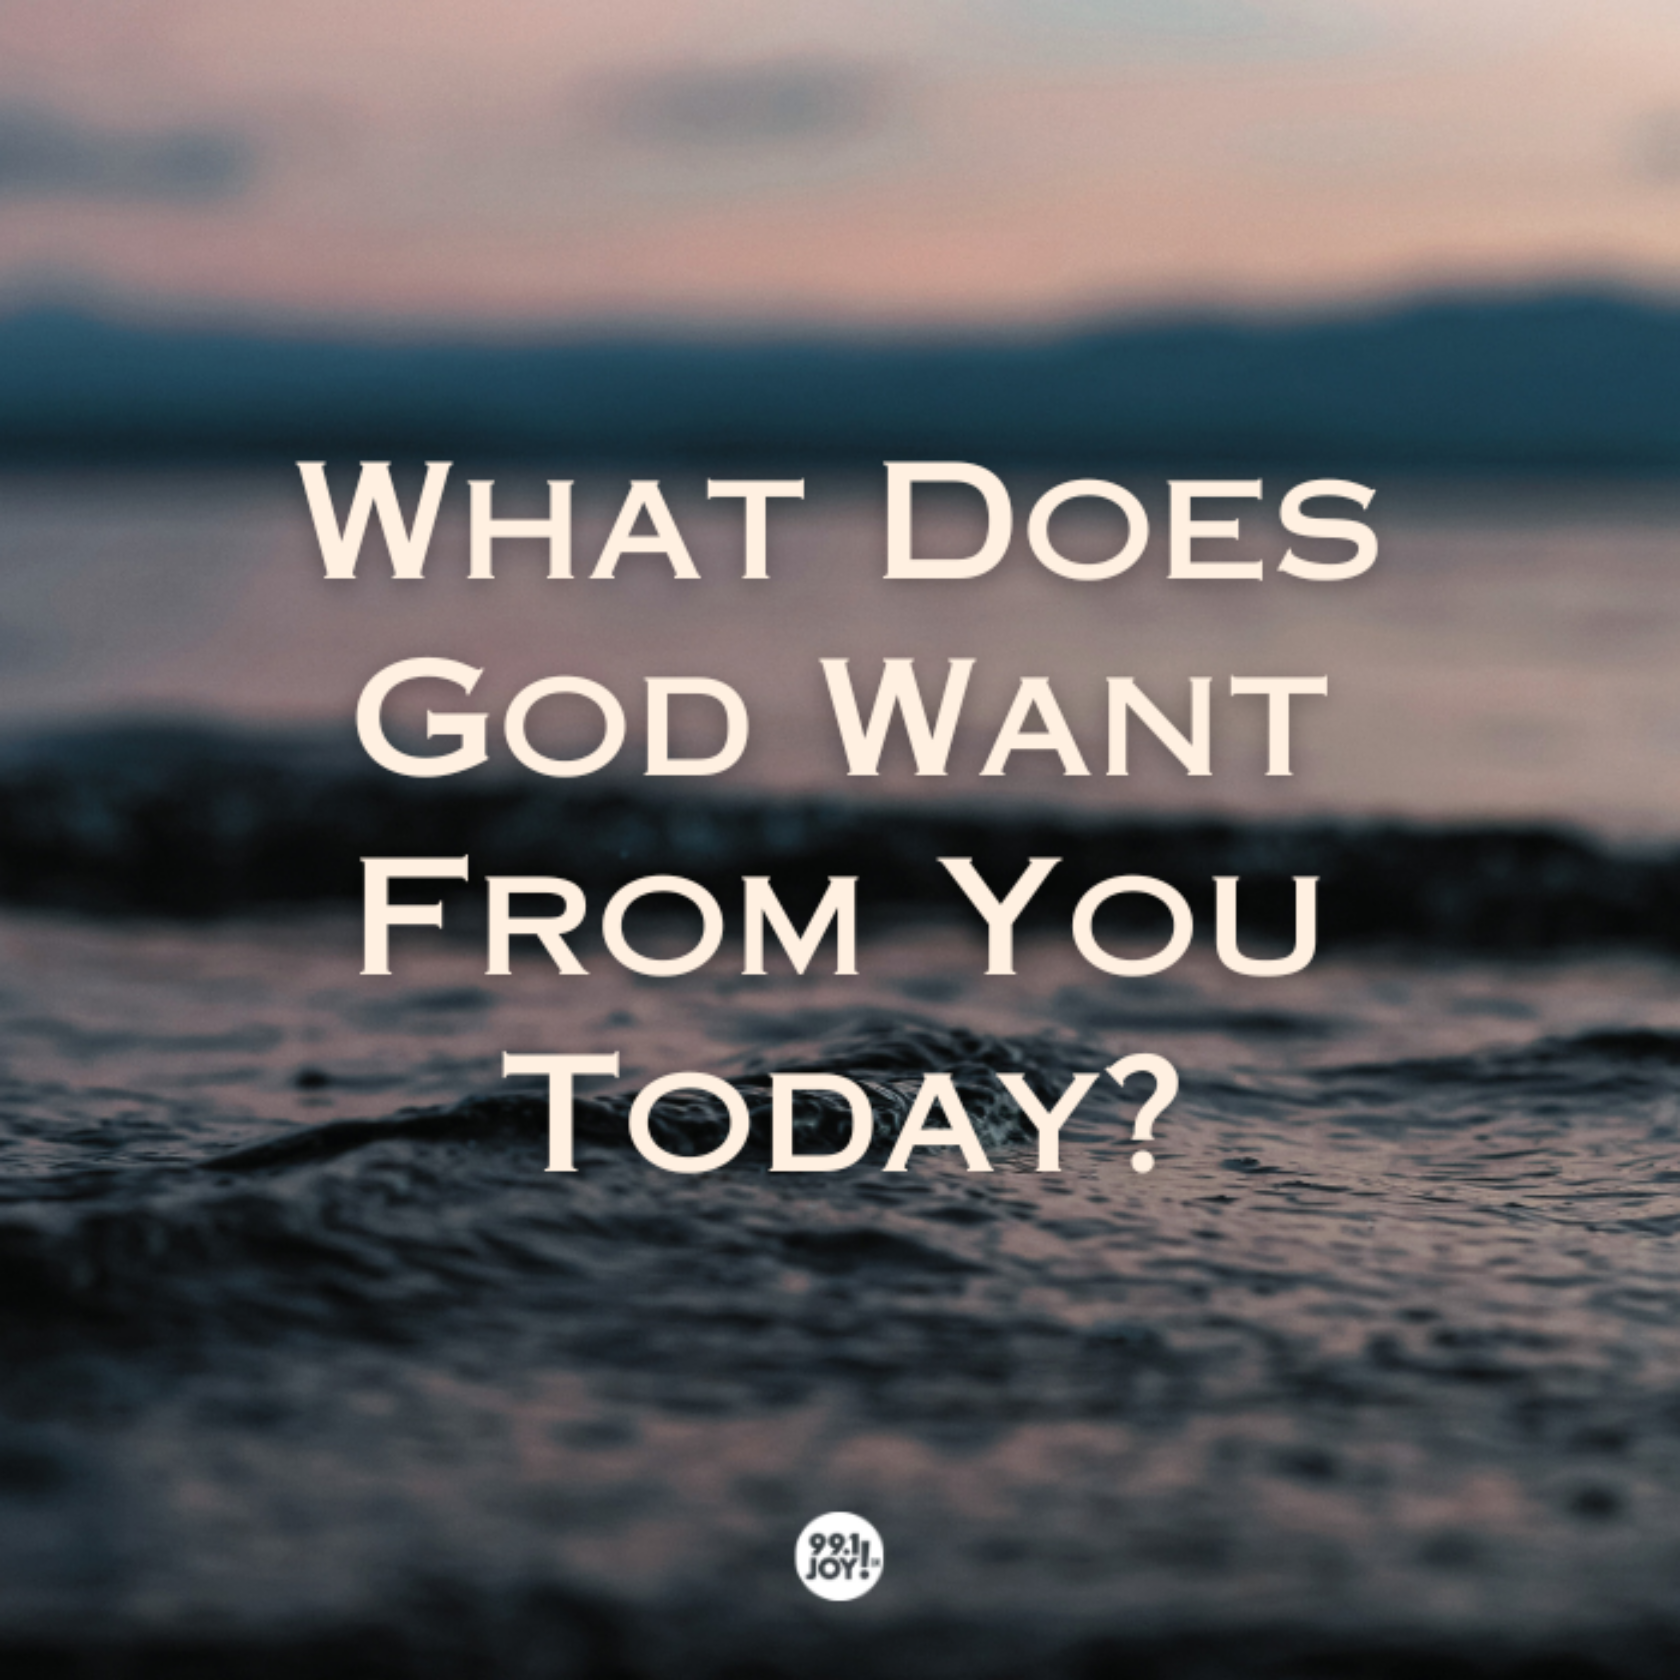 What Does God Want From You Today?